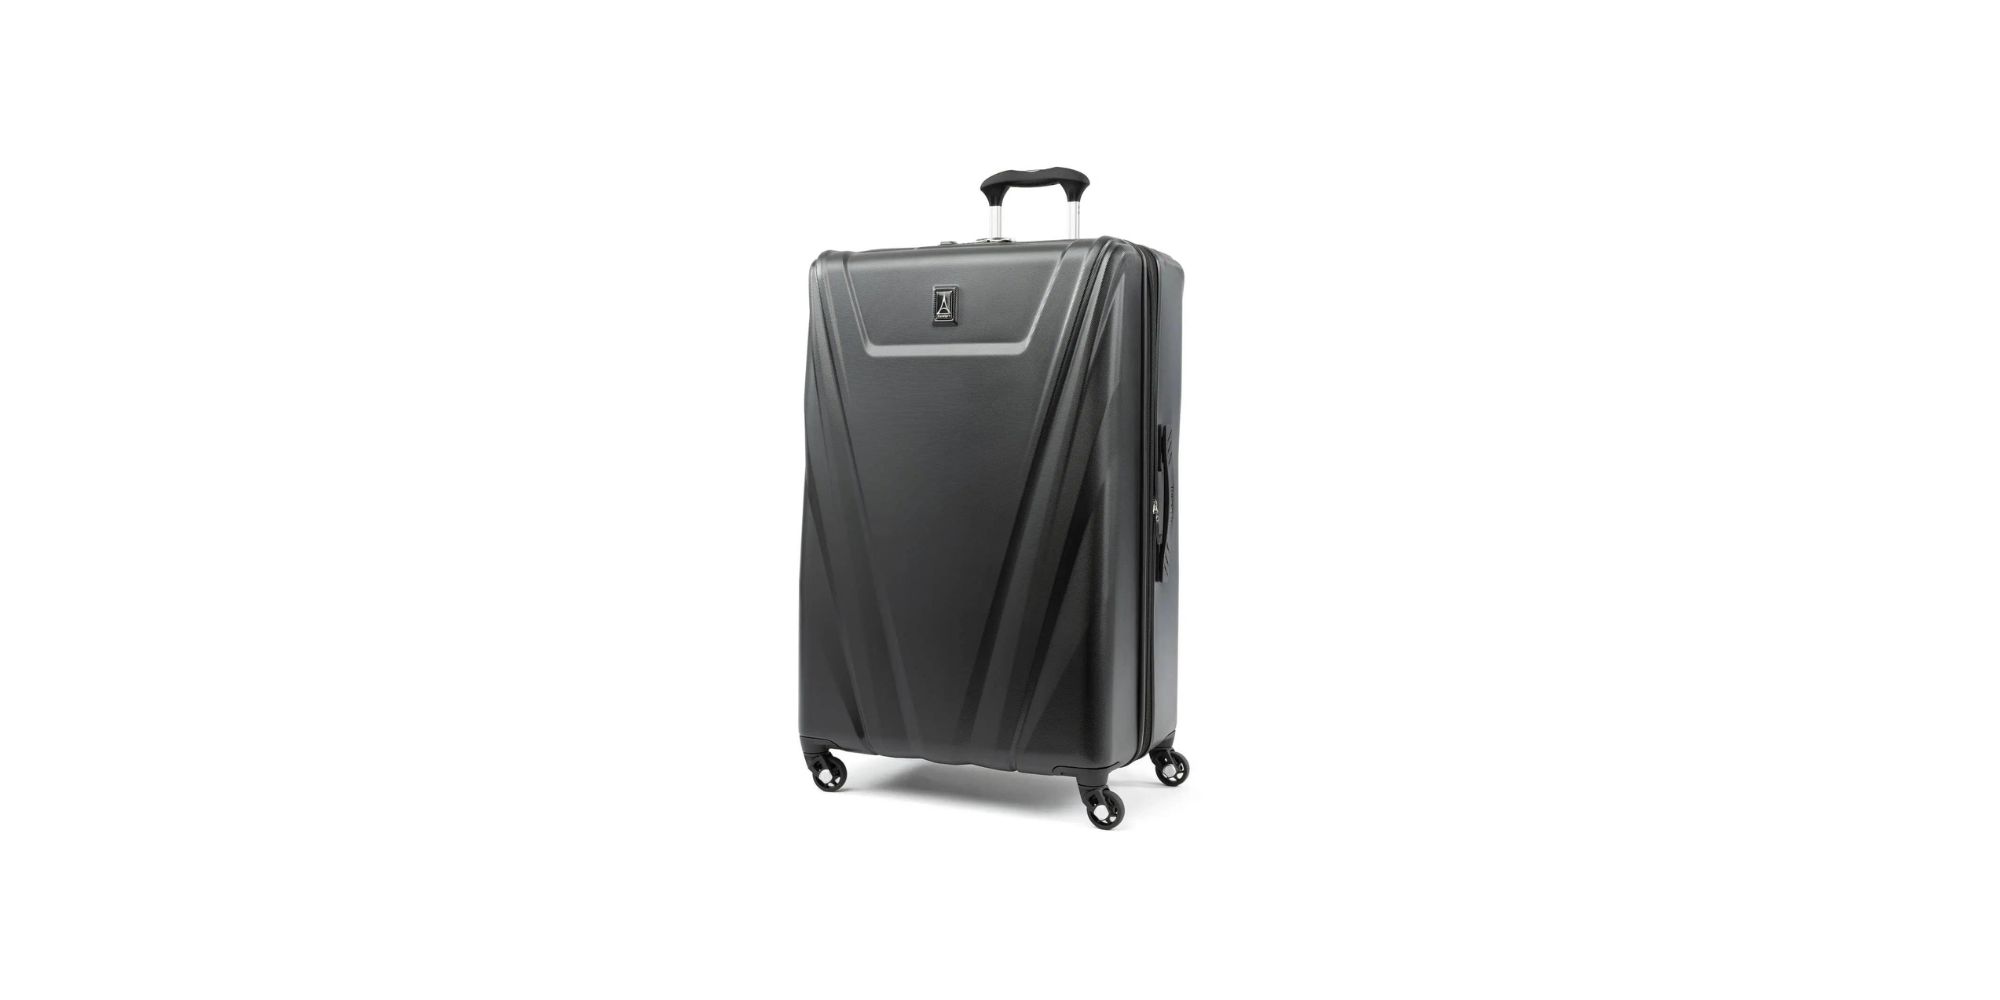 Atlantic Ultra Lite 29 Lightweight Luggage, Color: Blue Turquoise